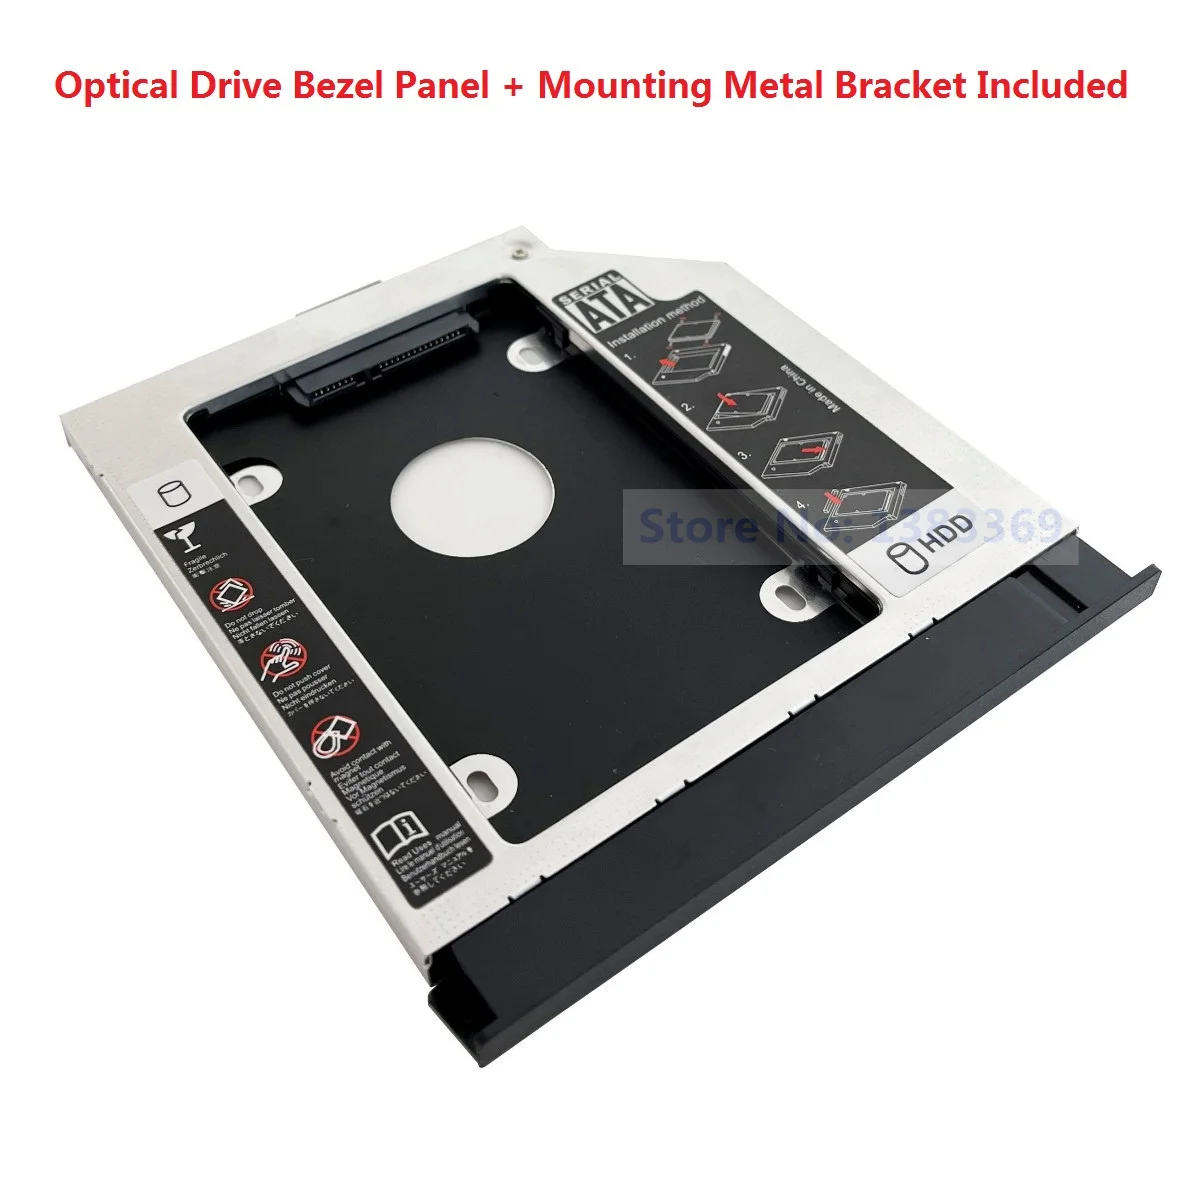 SATA 2nd Hard Drive SSD HDD Module Optical Caddy Frame Tray for Lenovo ThinkPad E540 E531 With Bezel Panel and Bracket 9 5mm for sata3 notebook optical drive bit hard drive bracket universal ssd solid state drive bracket